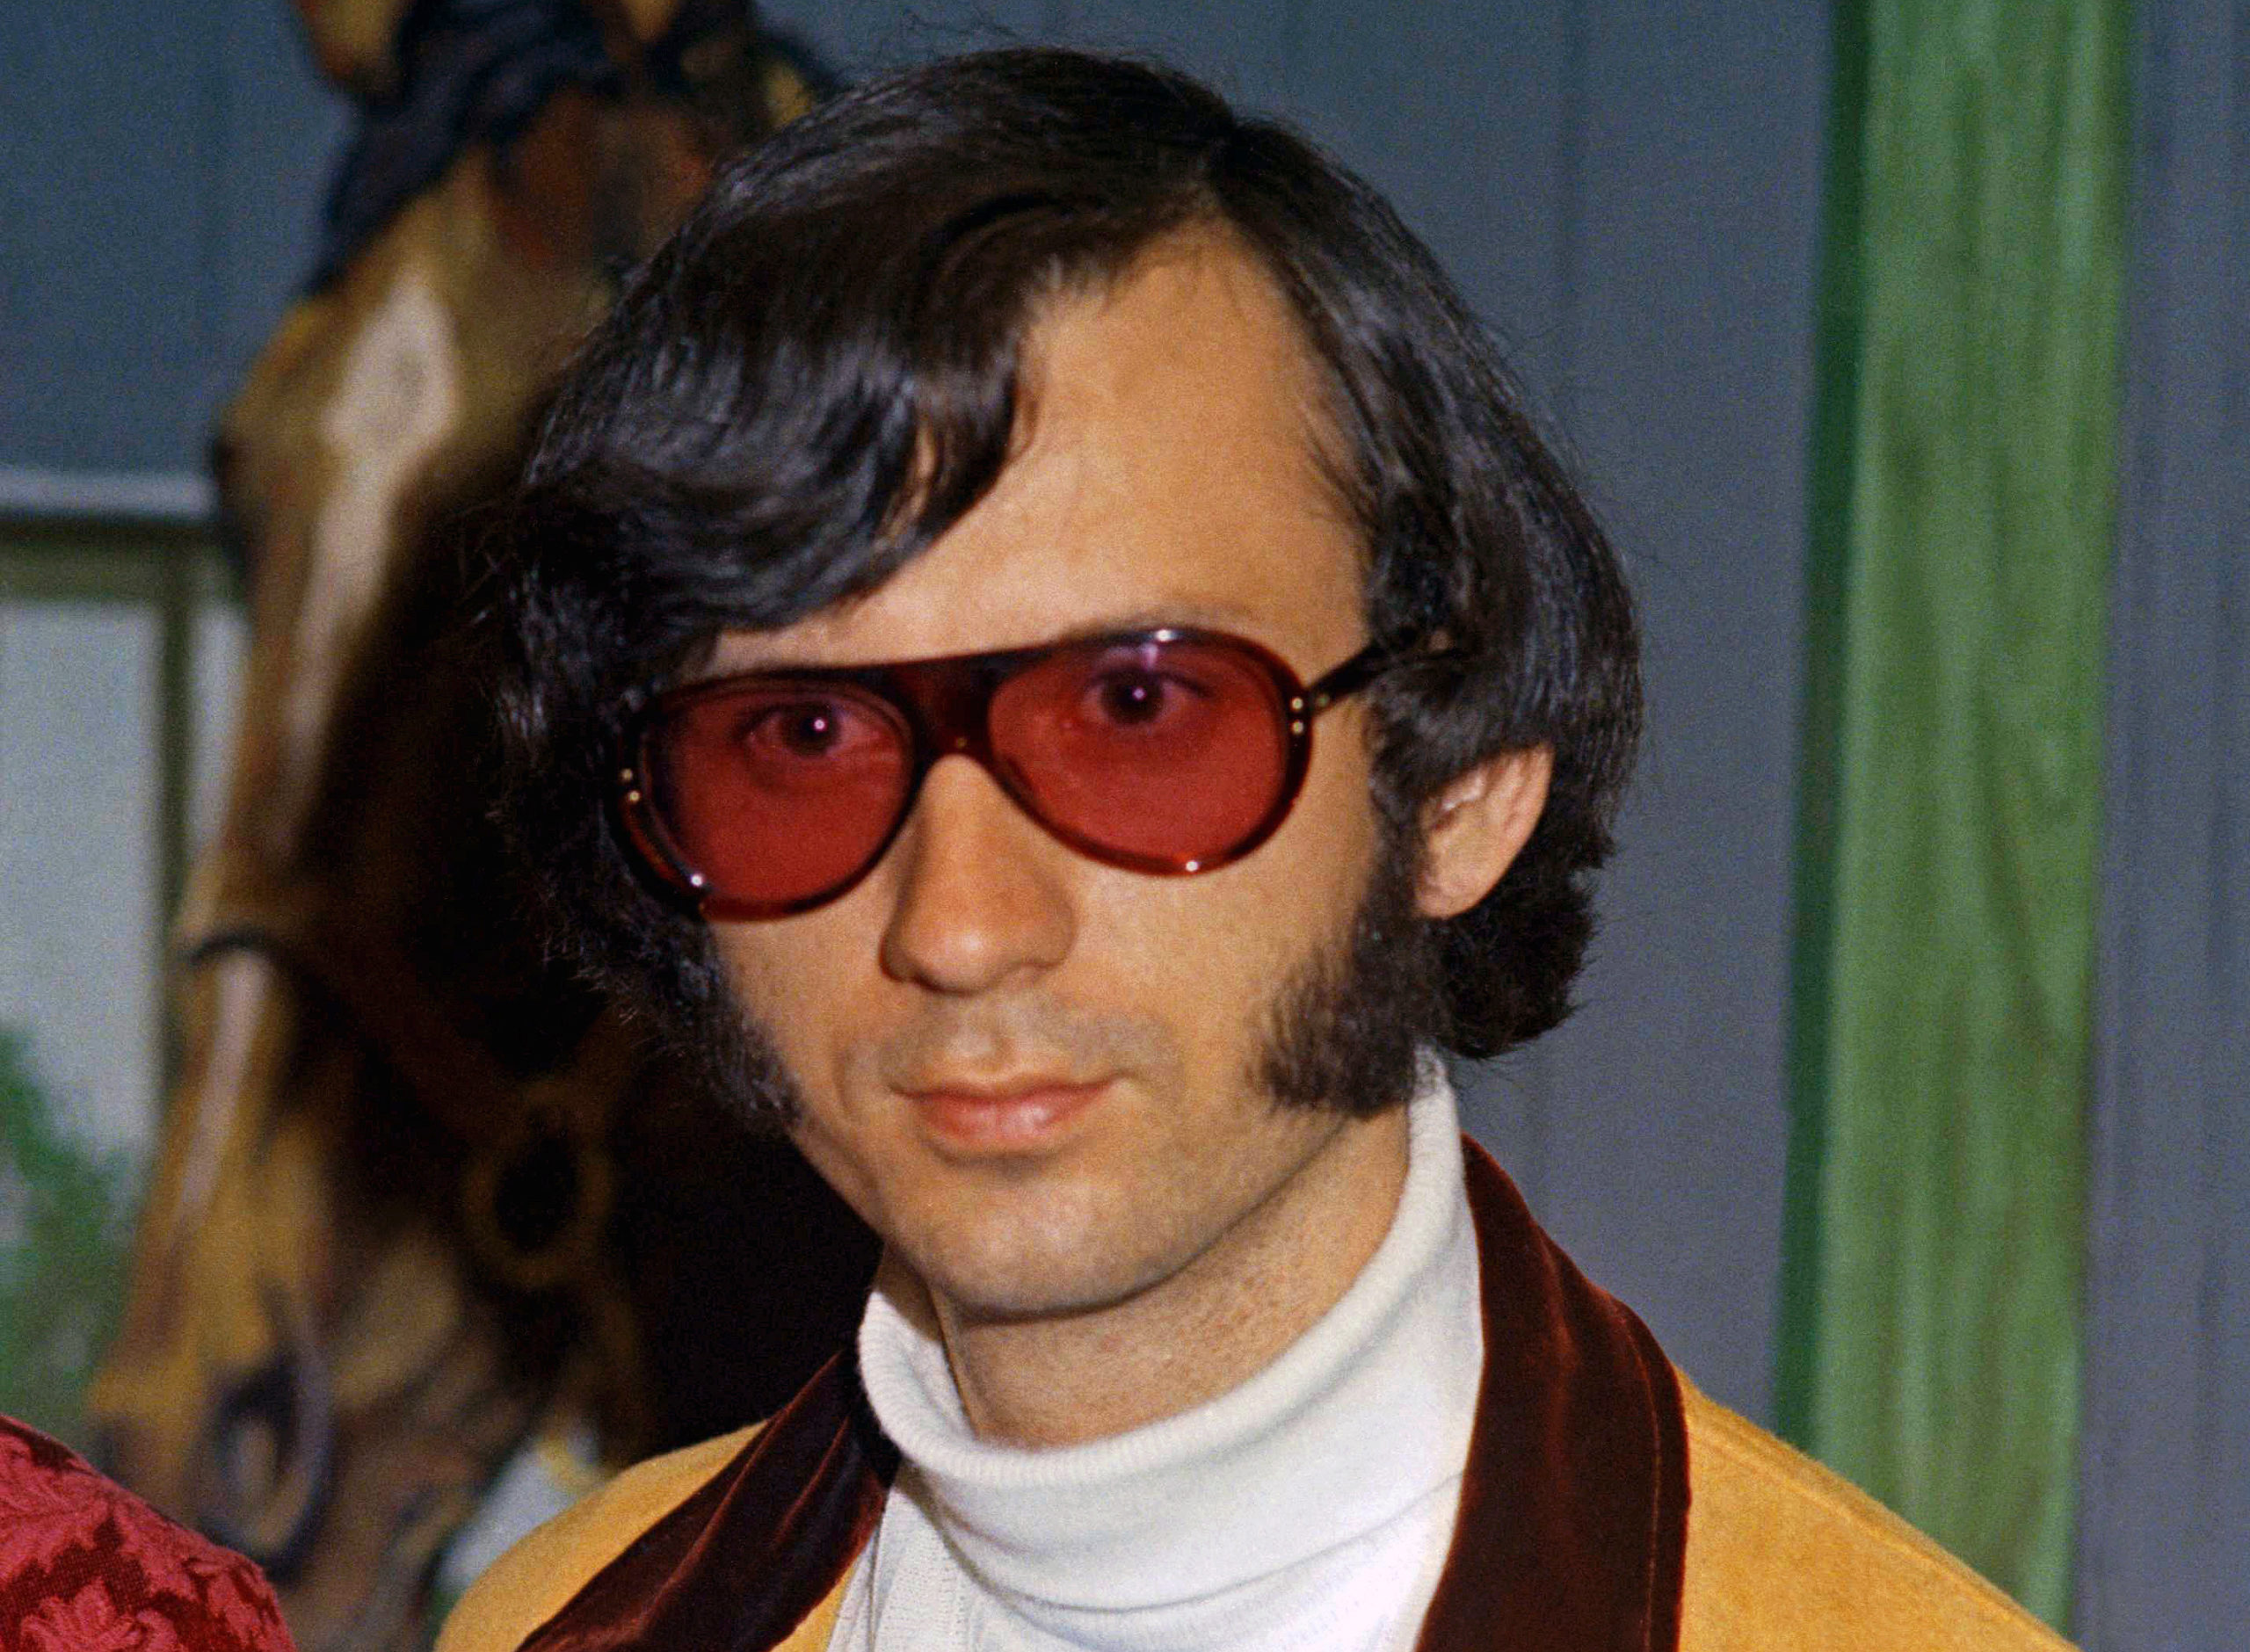 FILE - Mike Nesmith of The Monkees singing group appears at press conference at Warwick Hotel in Ne...